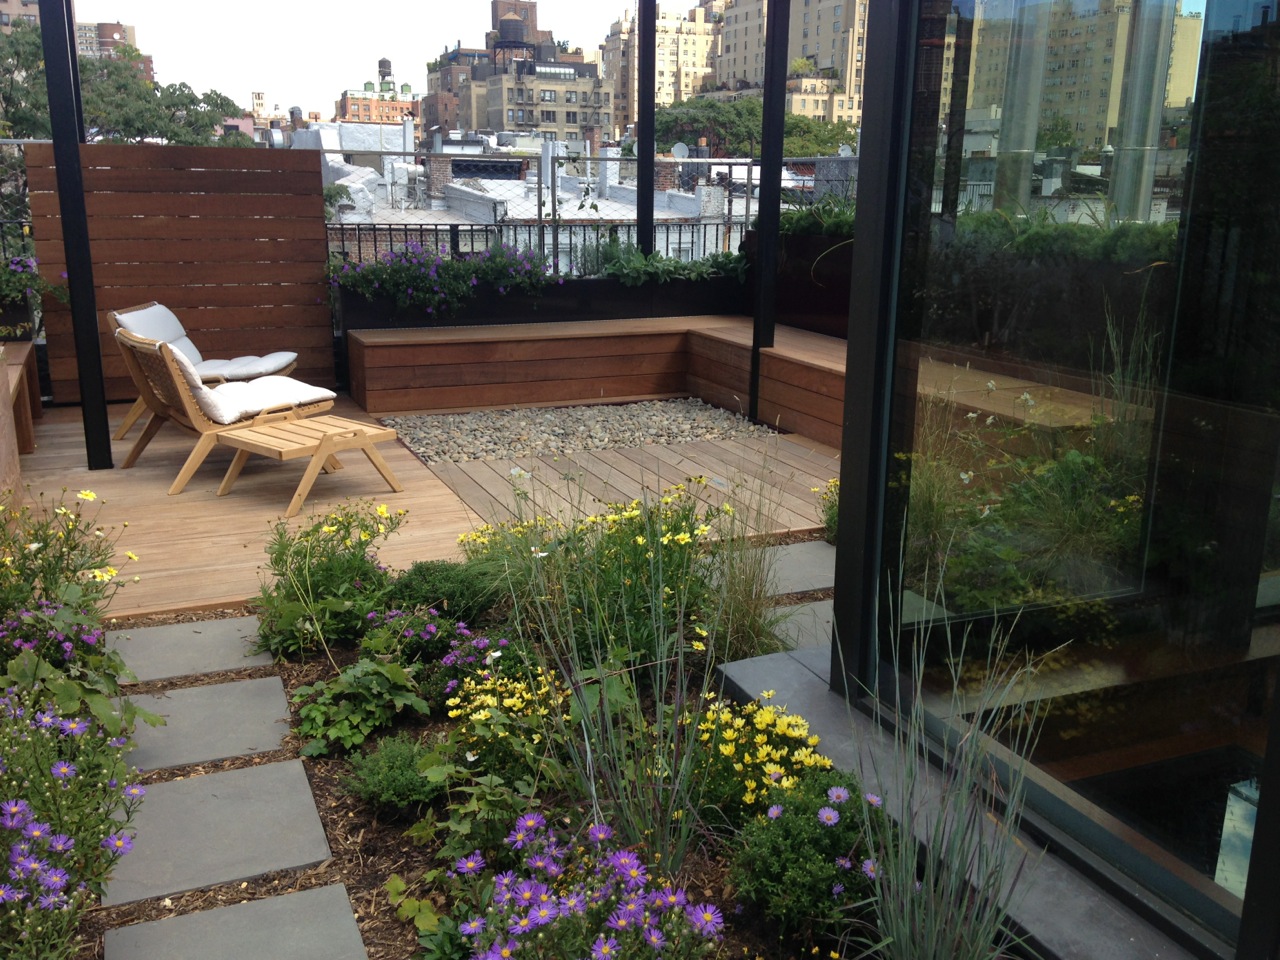 groundworks-gardening-nyc-residential-apartment-roof-garden-patio